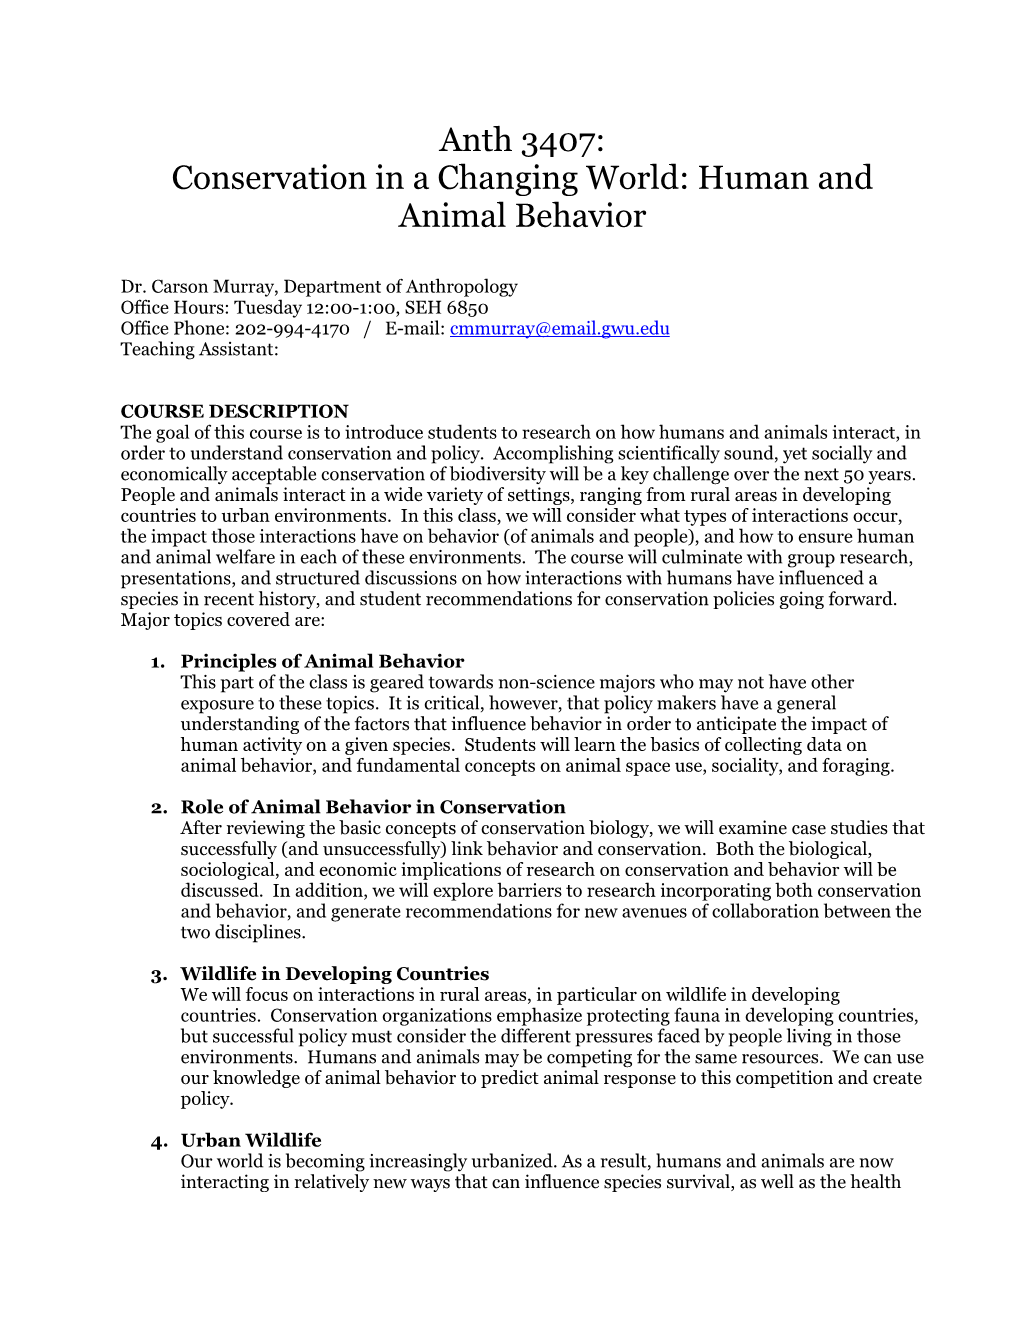 Conservation in a Changing World: Human and Animal Behavior